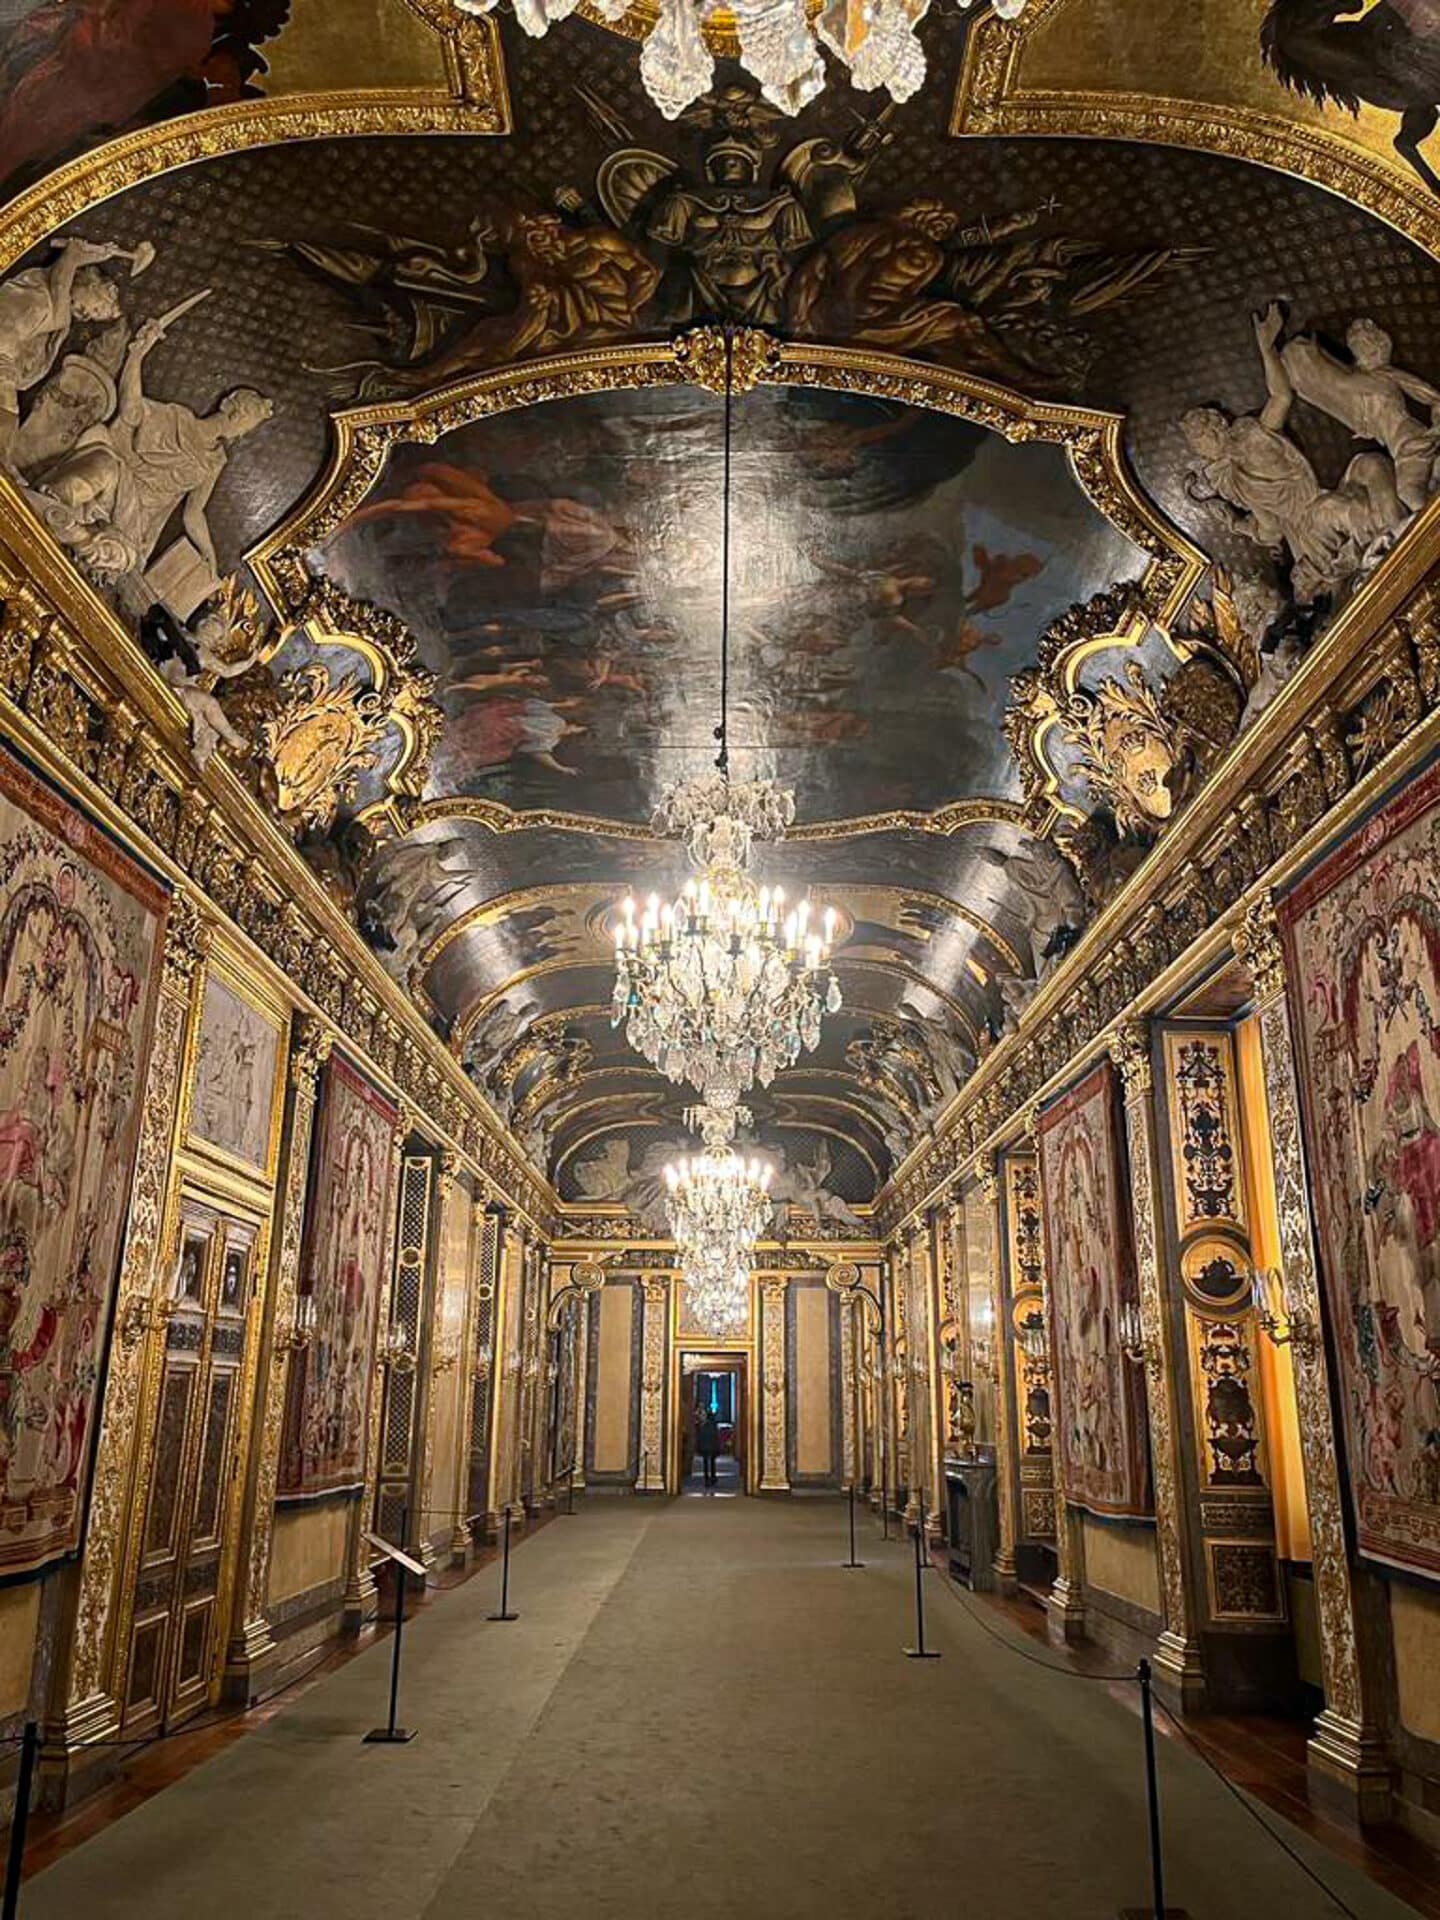 Inside Stockholm's Royal Palace - the decorations are resplendent and fit for a King